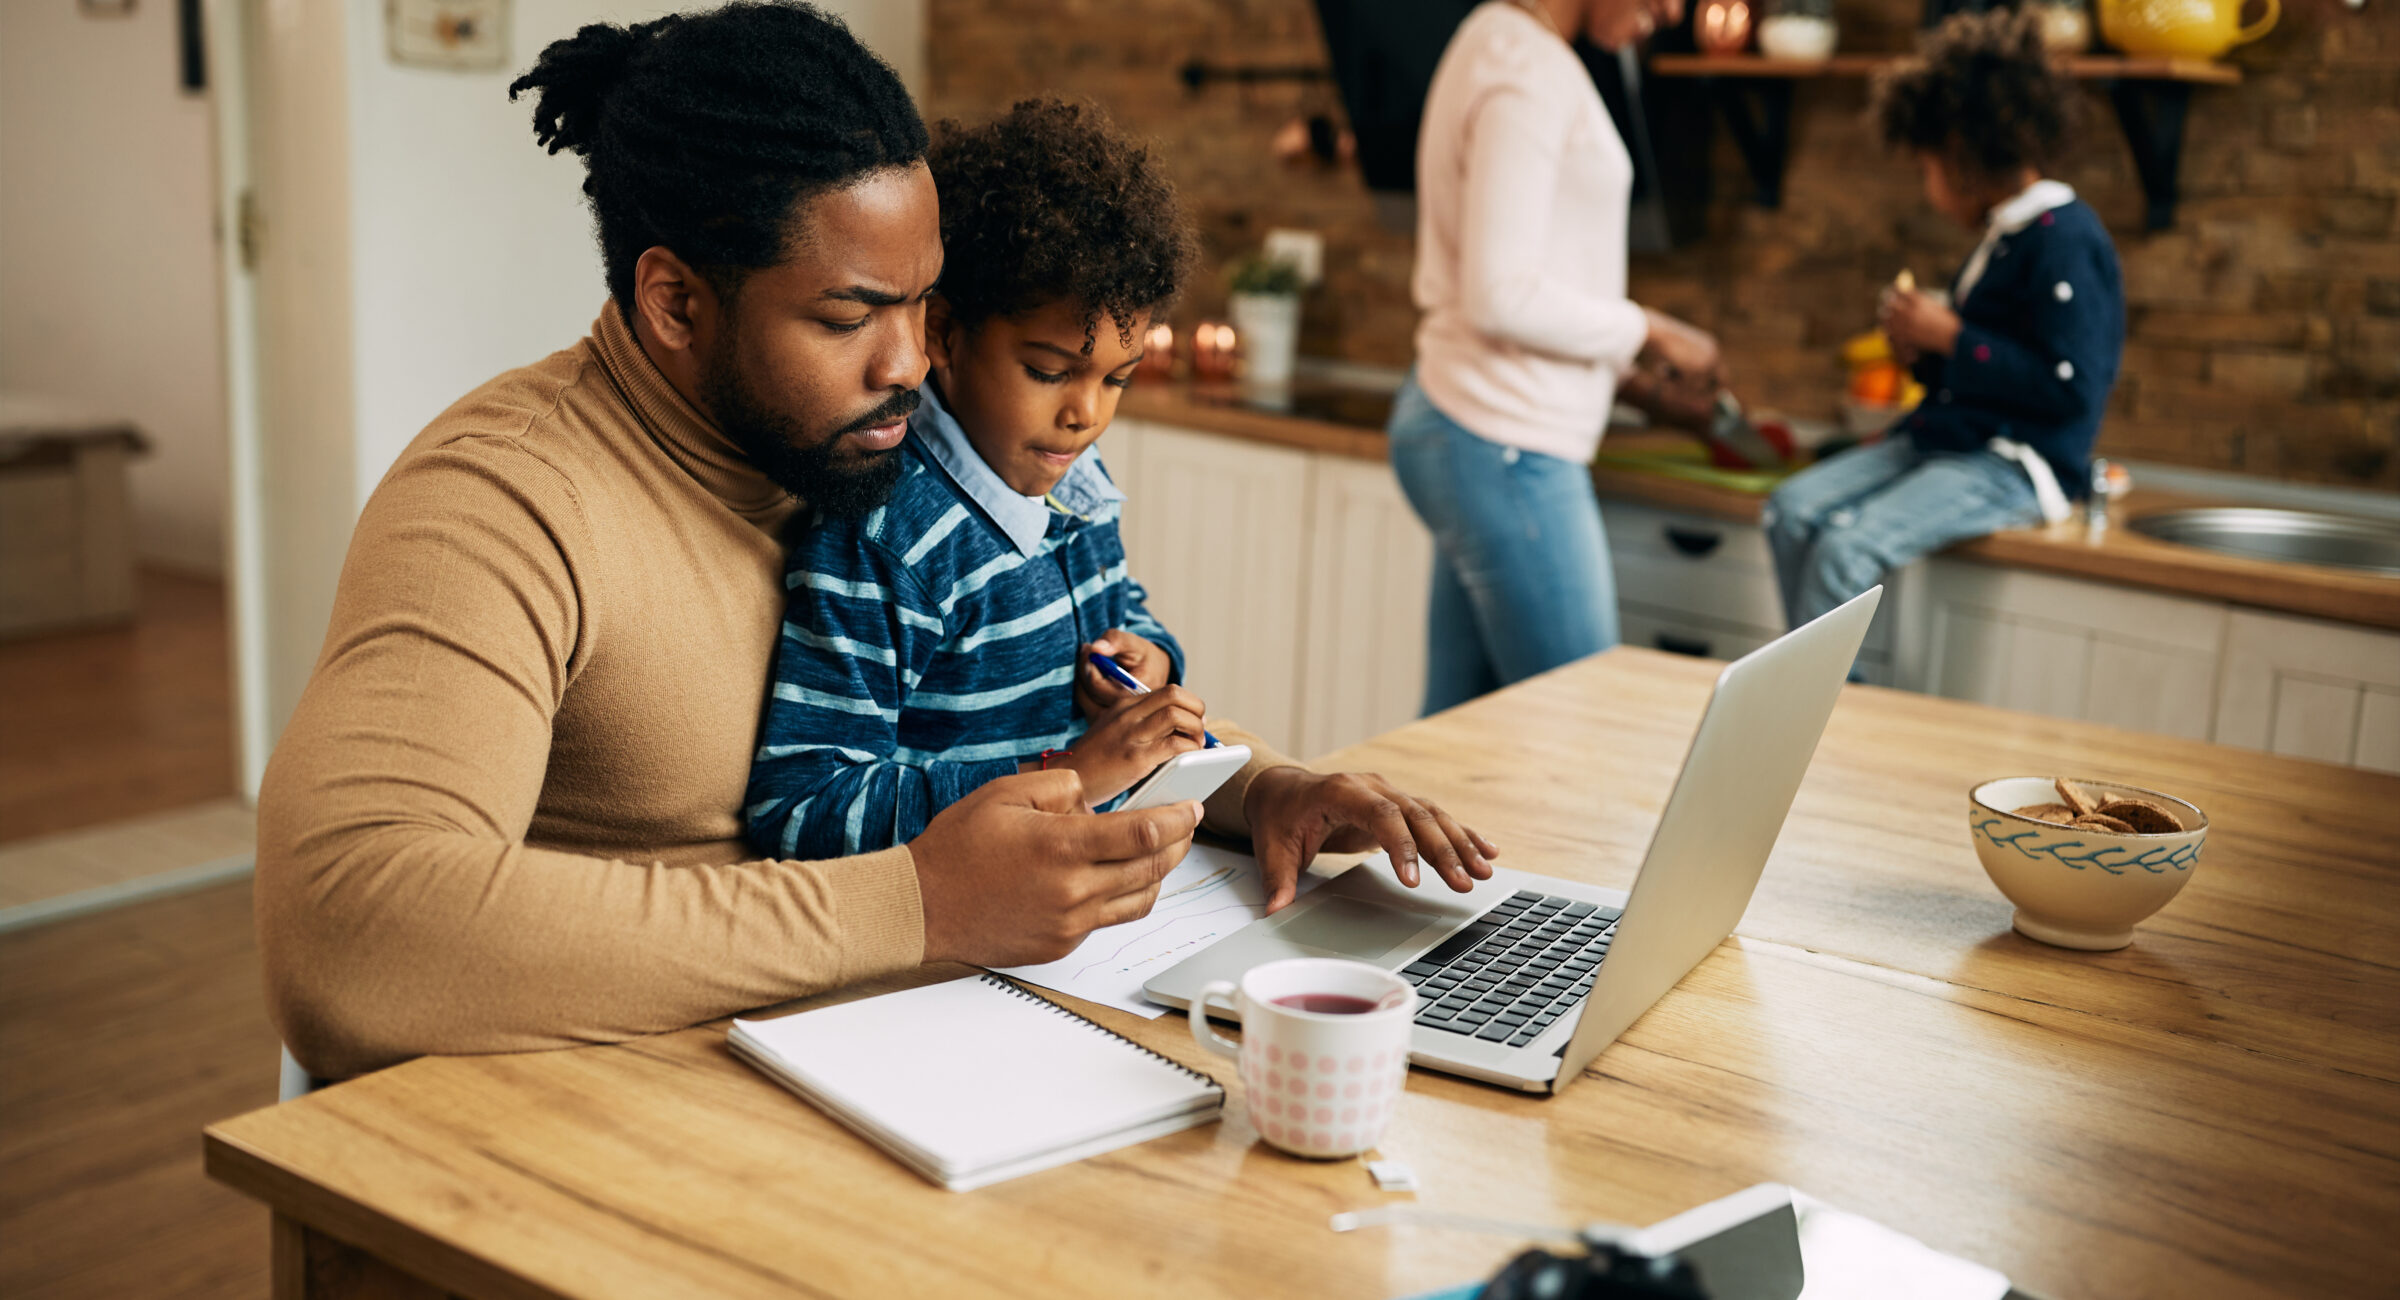 Black working father using laptop and mobile phone while son is sitting on his lap. Mother and daughter are in the background.